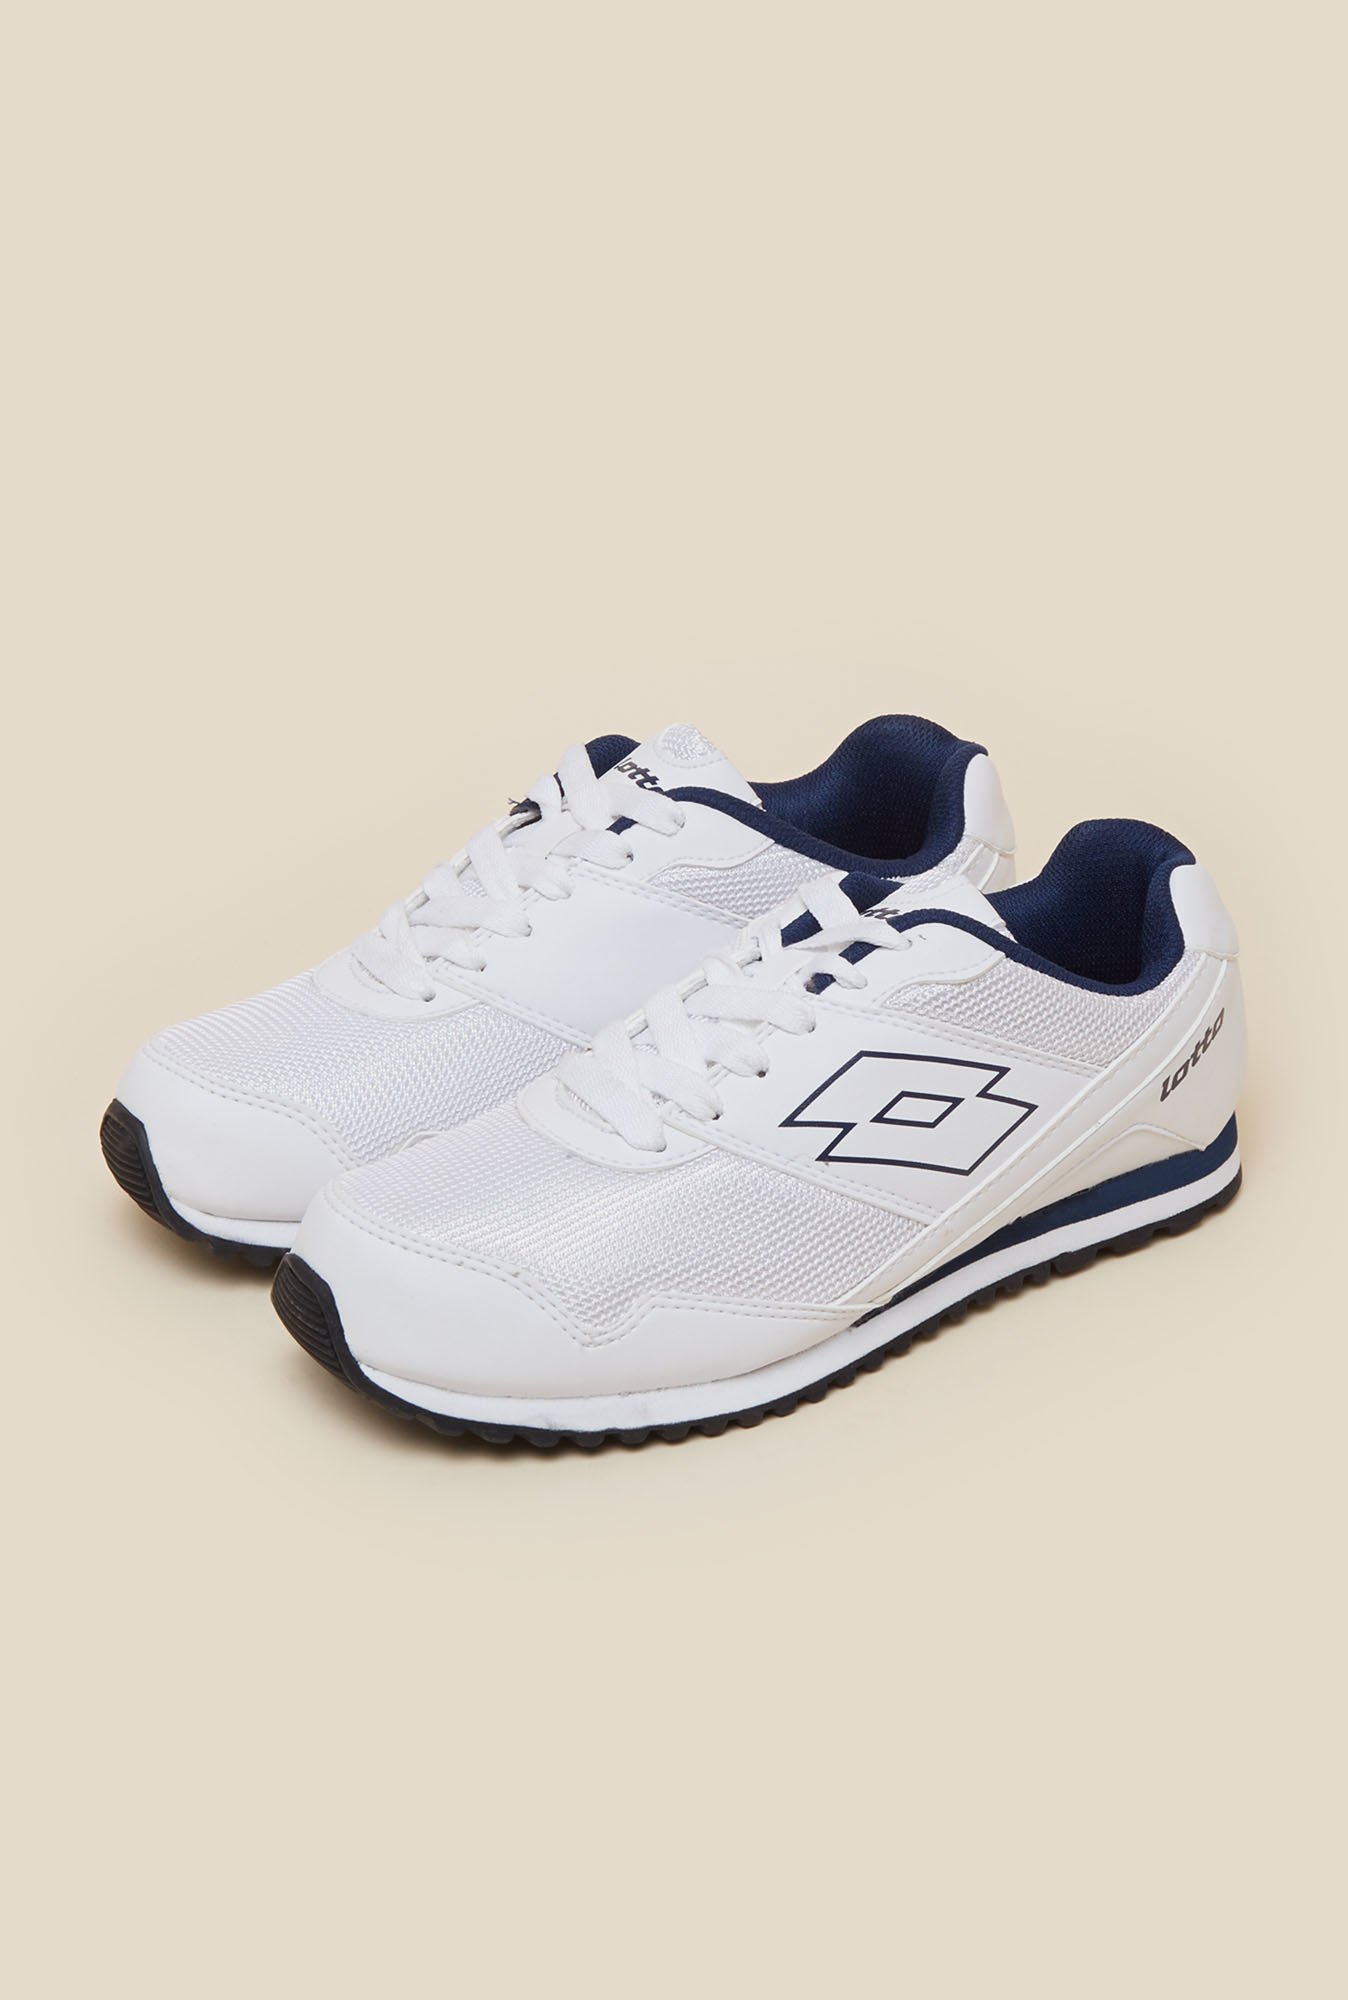 Lotto Record White Running Shoes from 